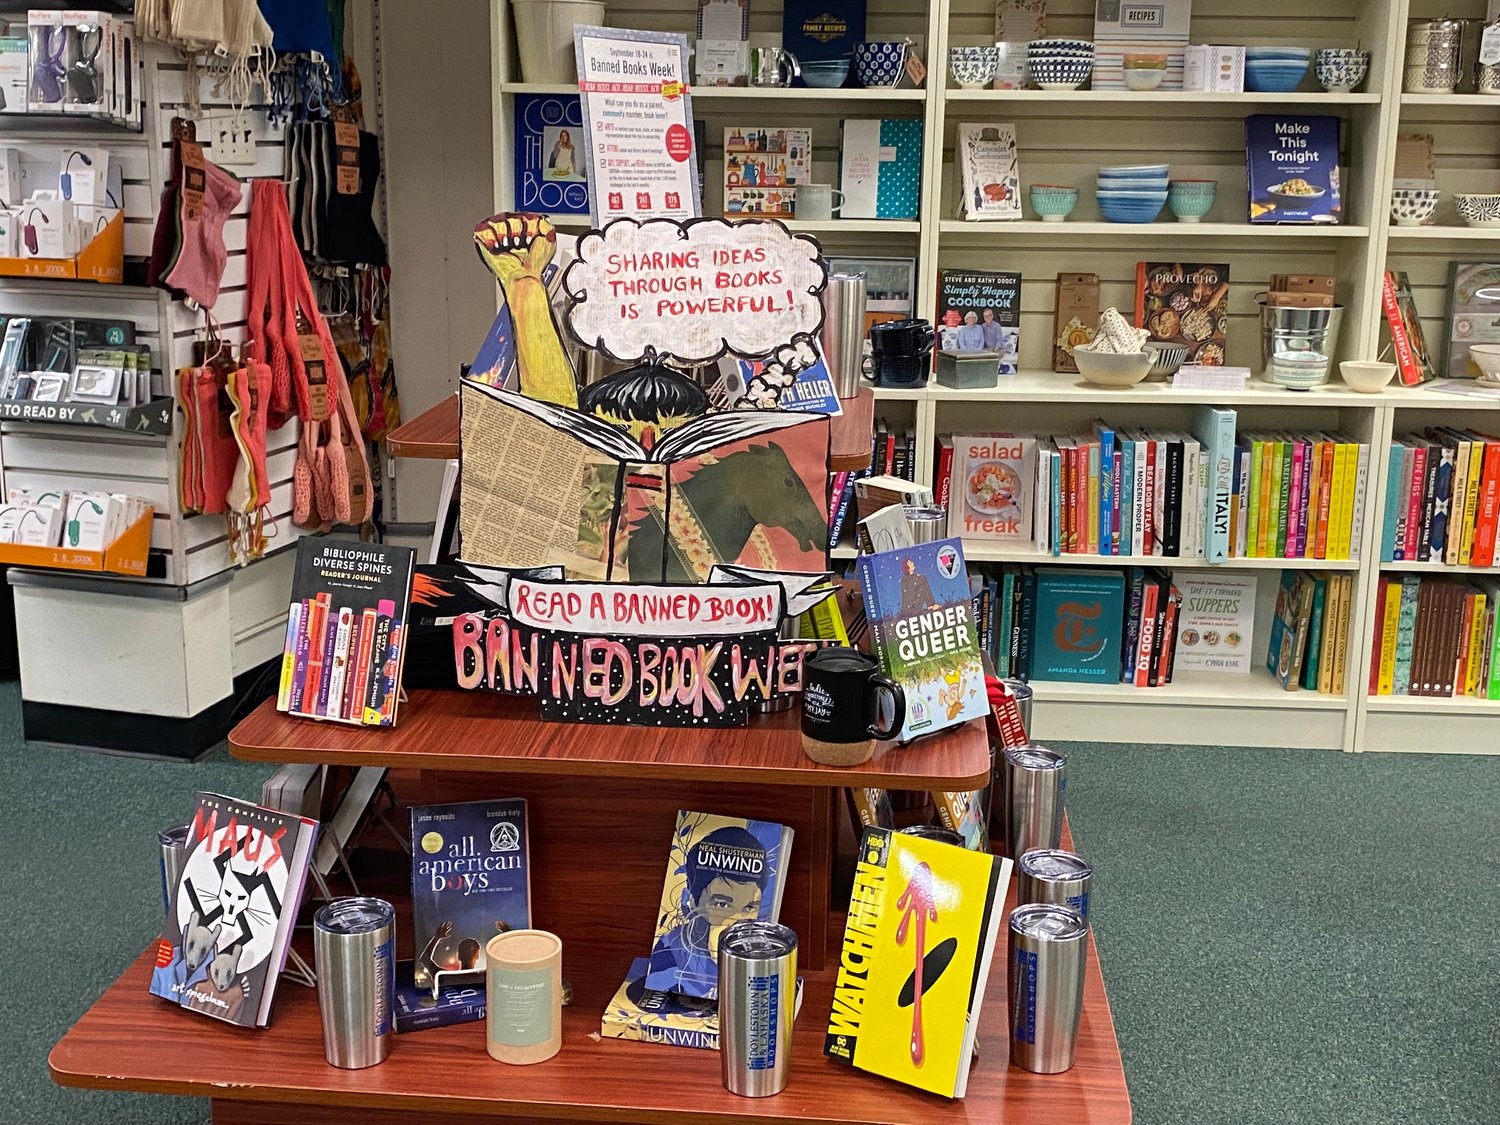 A wide variety of books are featured in a display at the Doylestown Bookshop.